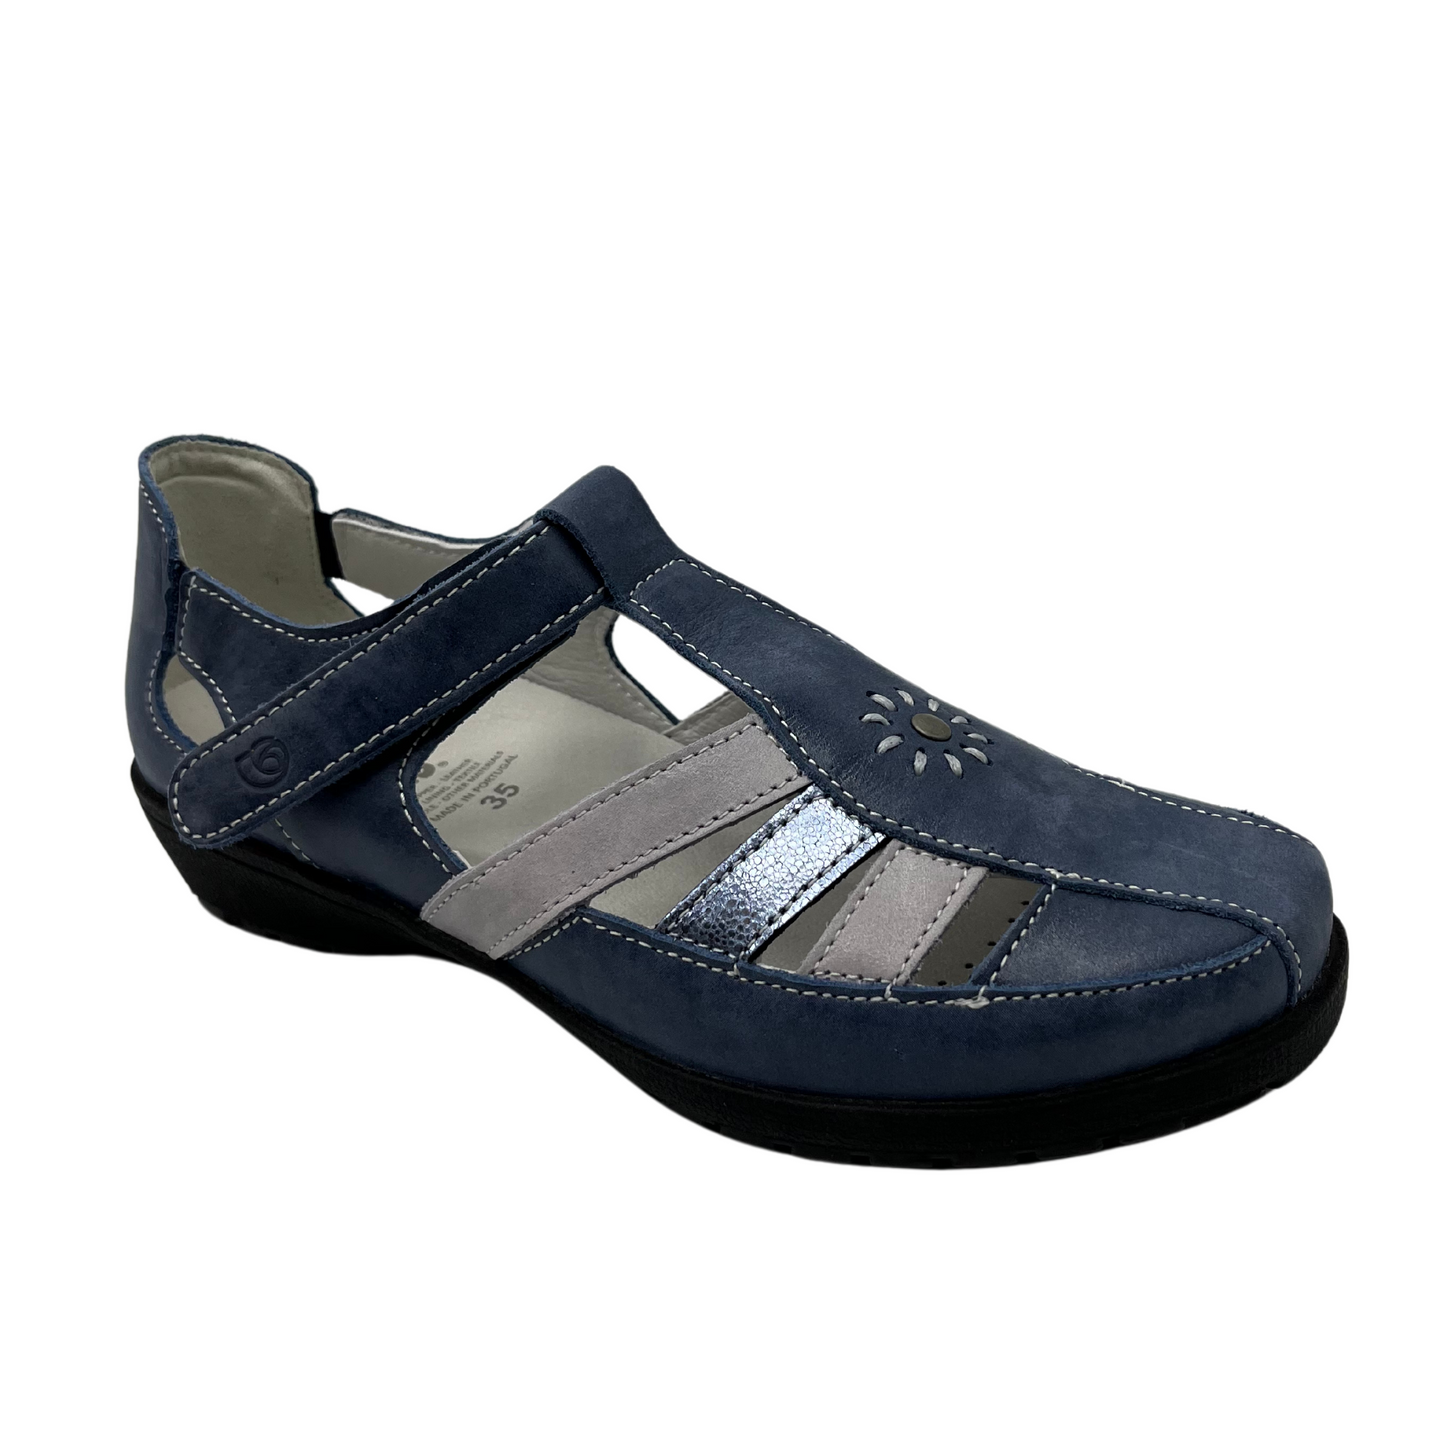 45 degree angled view of blue leather shoe with white and blue metallic straps and velcro on ankle strap